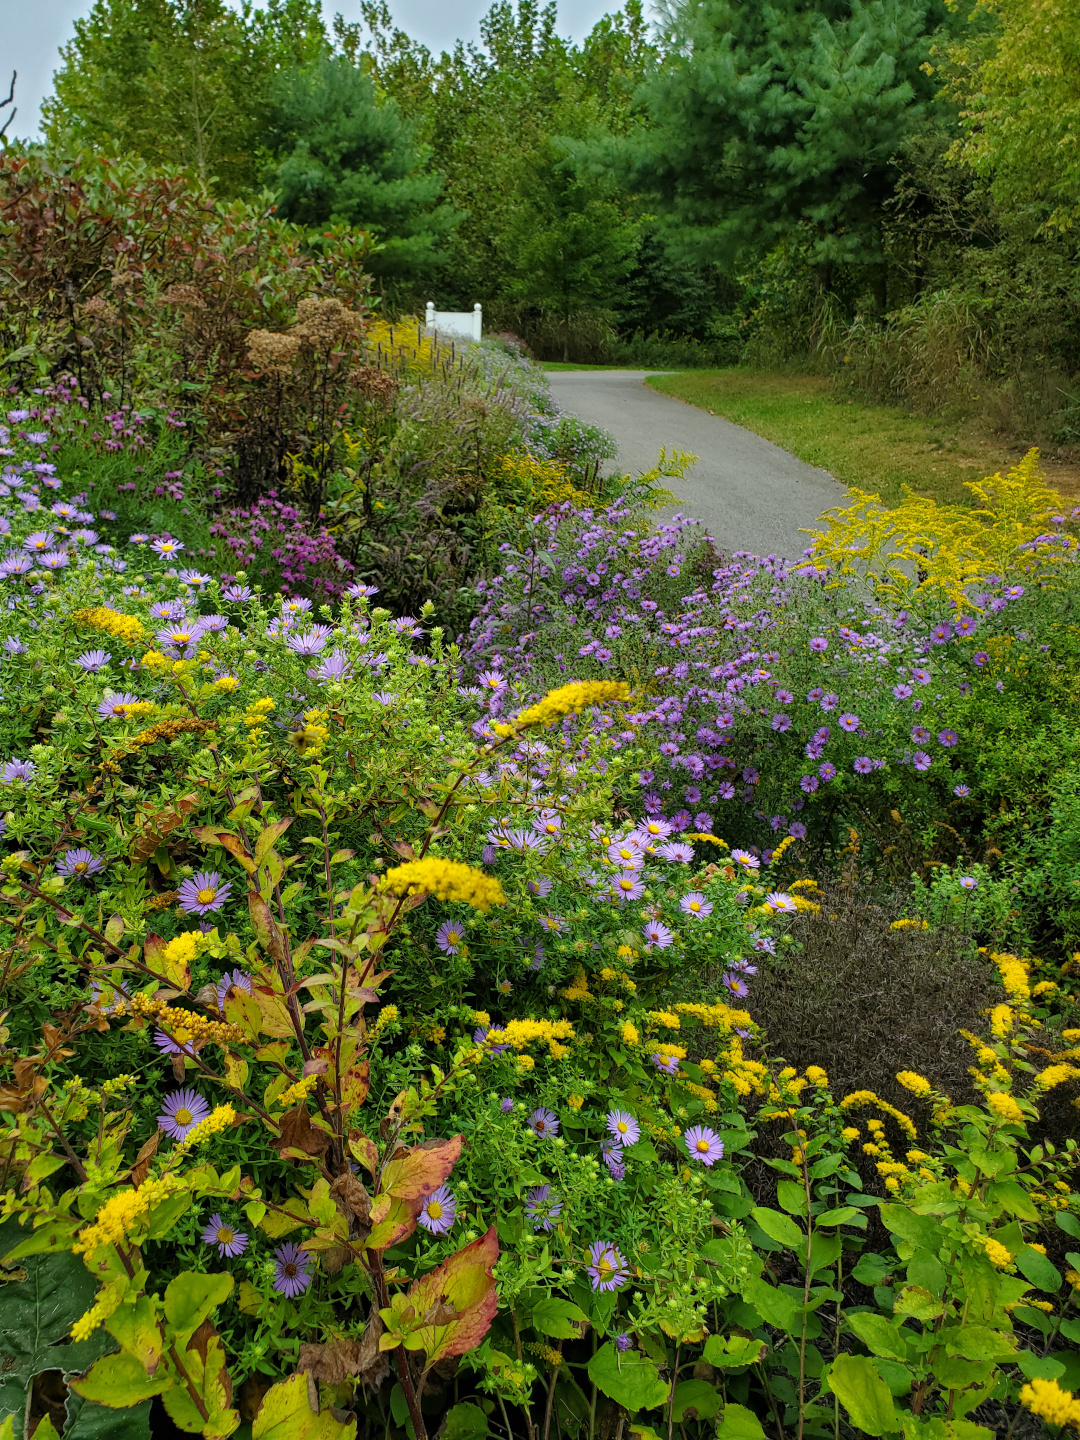 Yellow goldenrod and purple asters